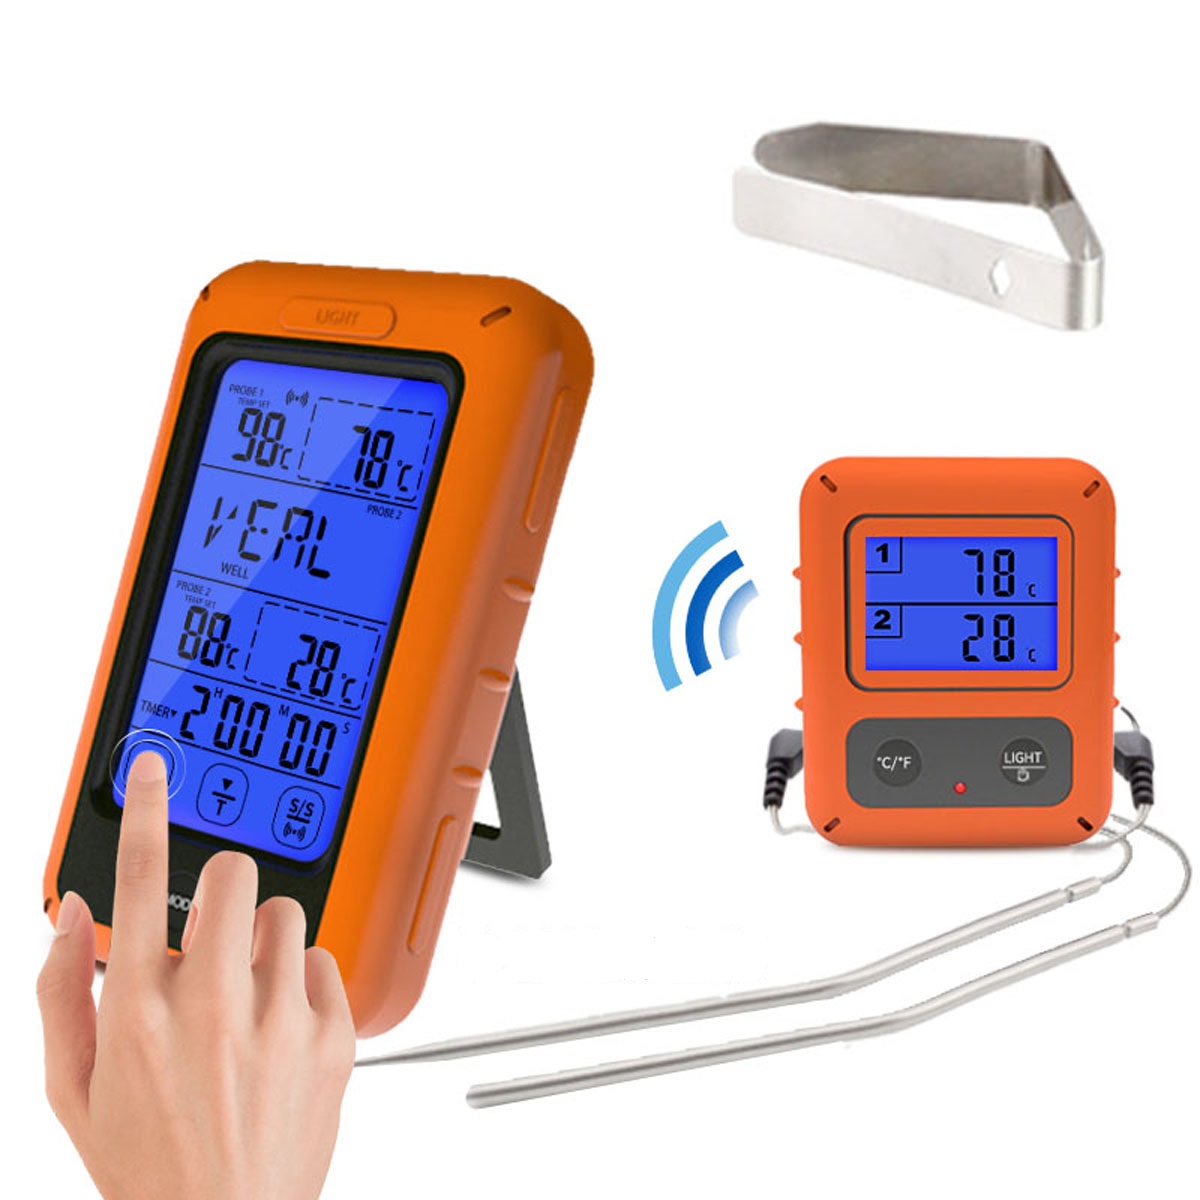 

TS-TP20 Remote Wireless Touch Screen Food Dual Temperature Probe Digital Thermometer Large Screen with Timer Digital Meat BBQ Oven Thermometer